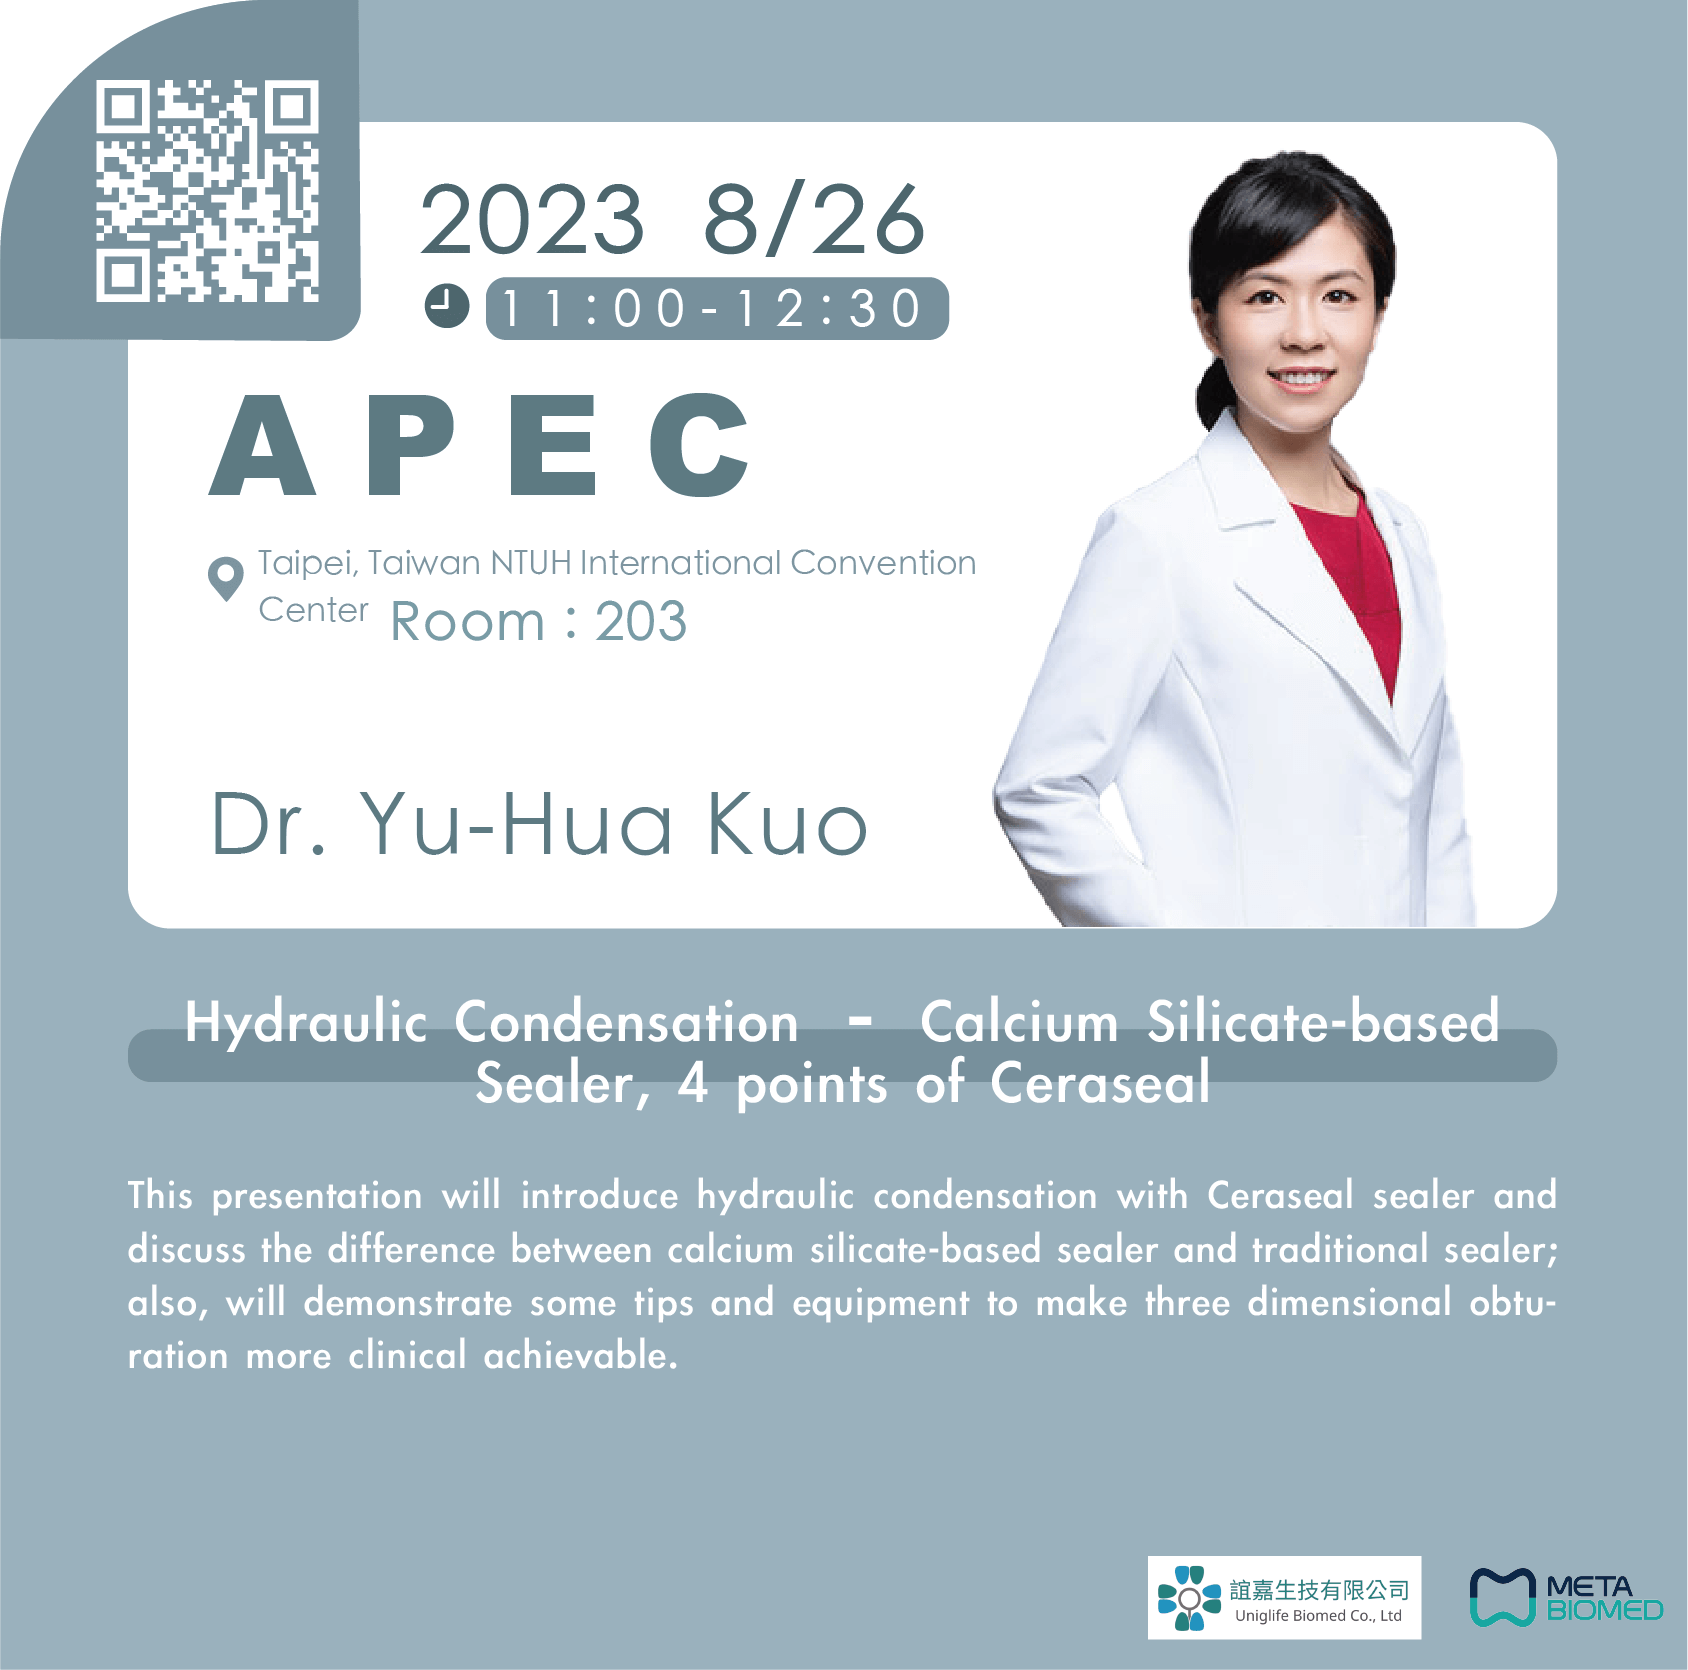 [APEC] Hydraulic Condensation – Calcium Silicate-based Sealer, 4 points of Ceraseal - Dr. Yu-Hua Kuo